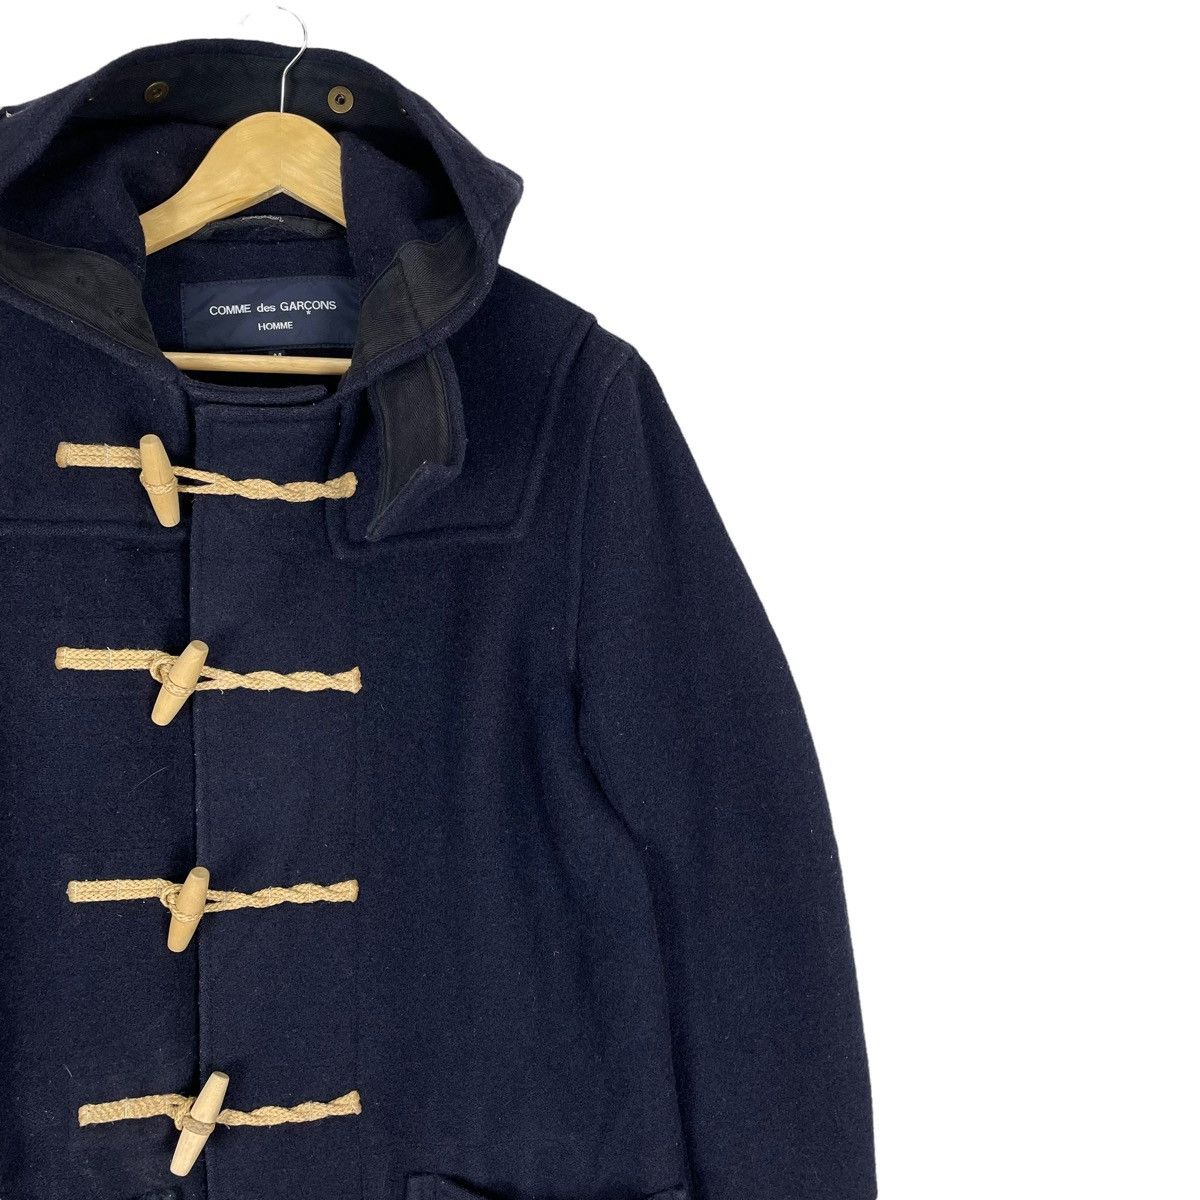 🔥CDGH X GLOVERALL FW12 DUFFLE COAT JACKET - 5